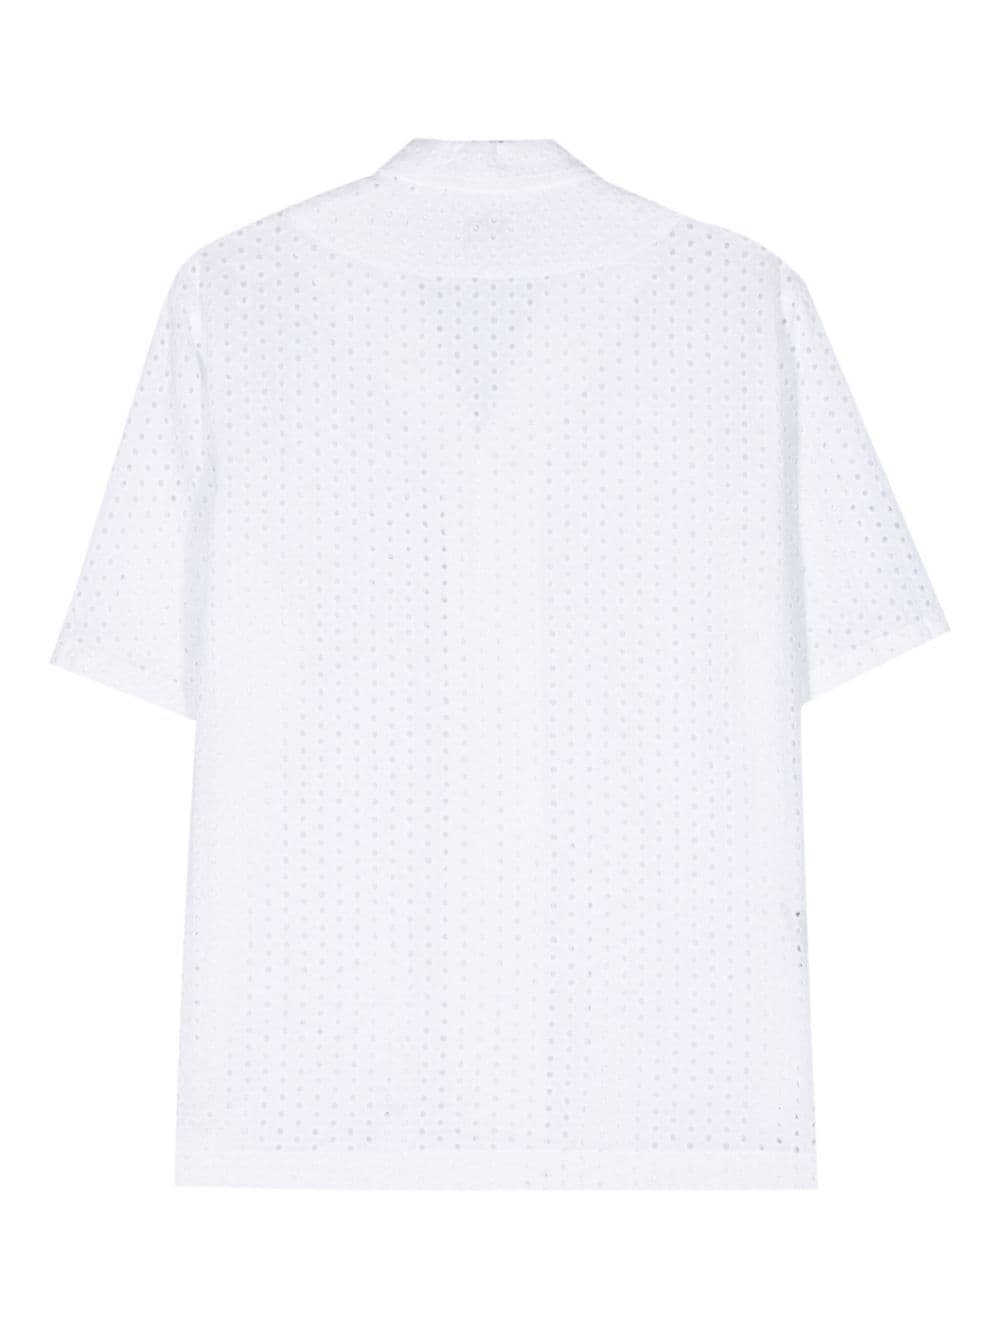 Tagliatore Overhemd met broderie anglaise - Wit